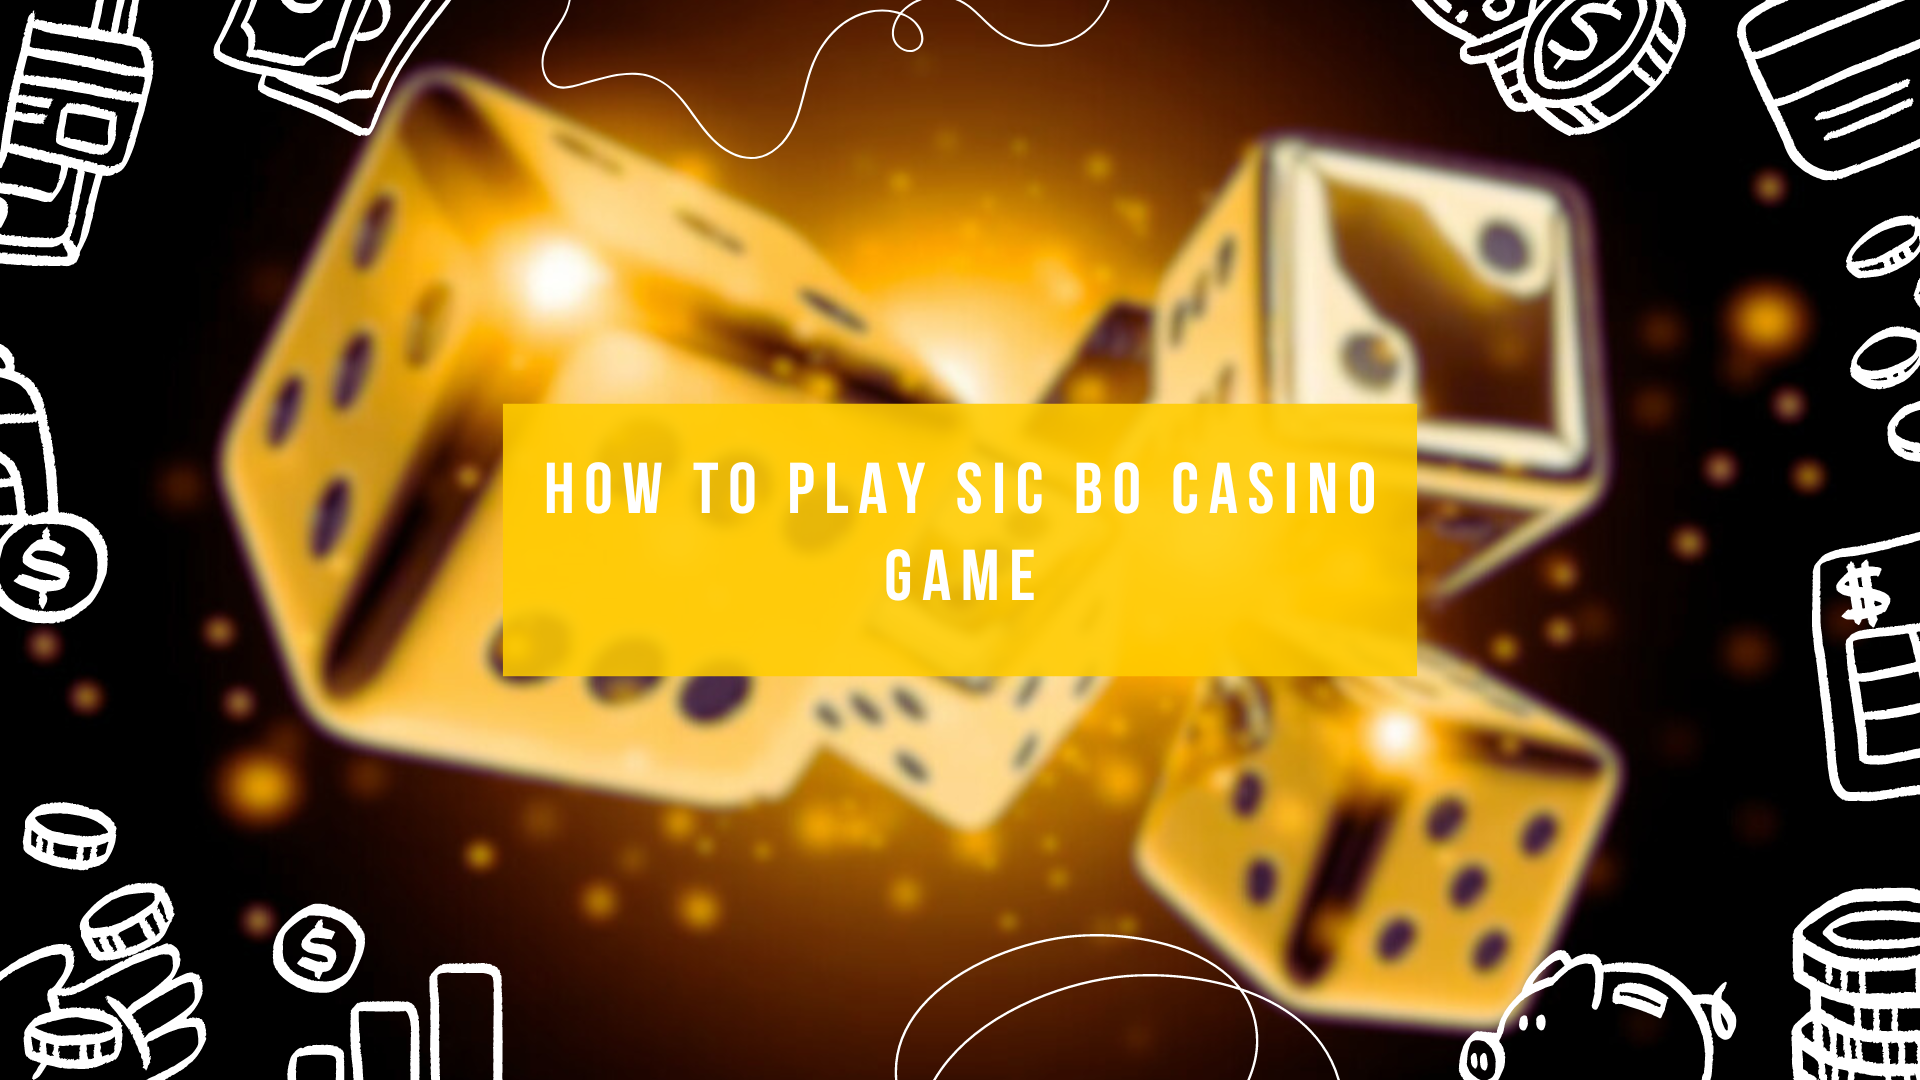 How to Play Sic Bo Casino Game